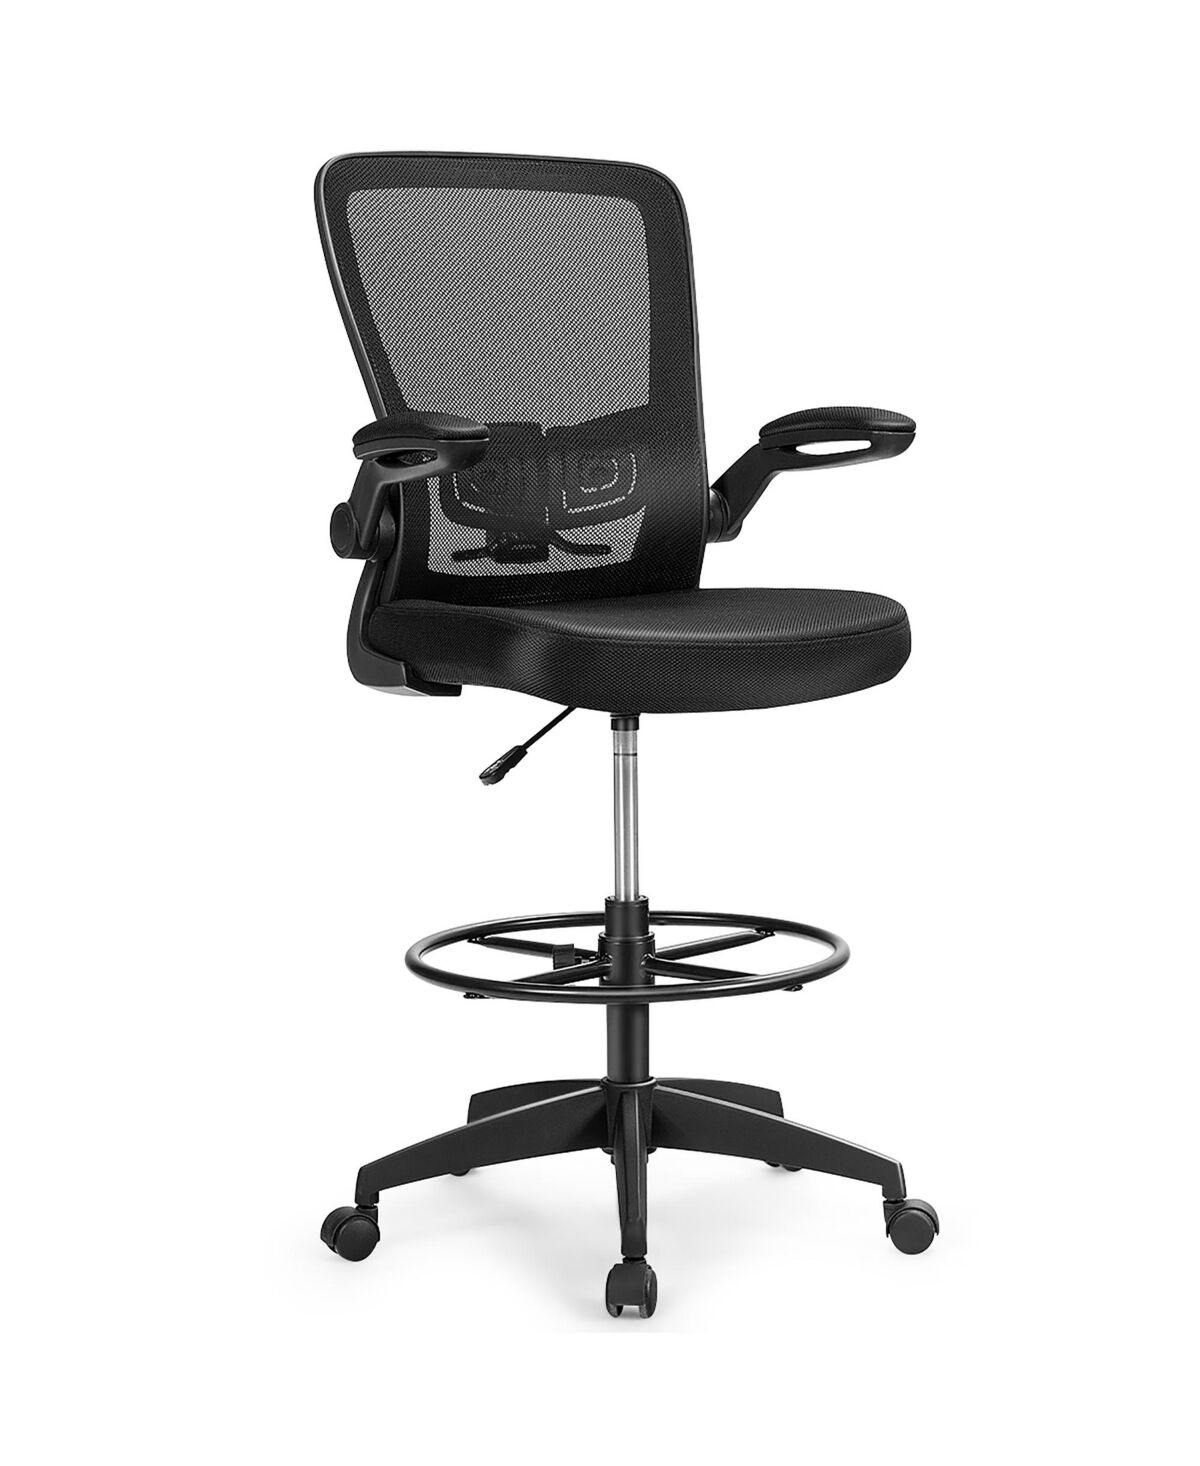 Costway Tall Office Chair Adjustable Height Lumbar Support Flip Up - Black